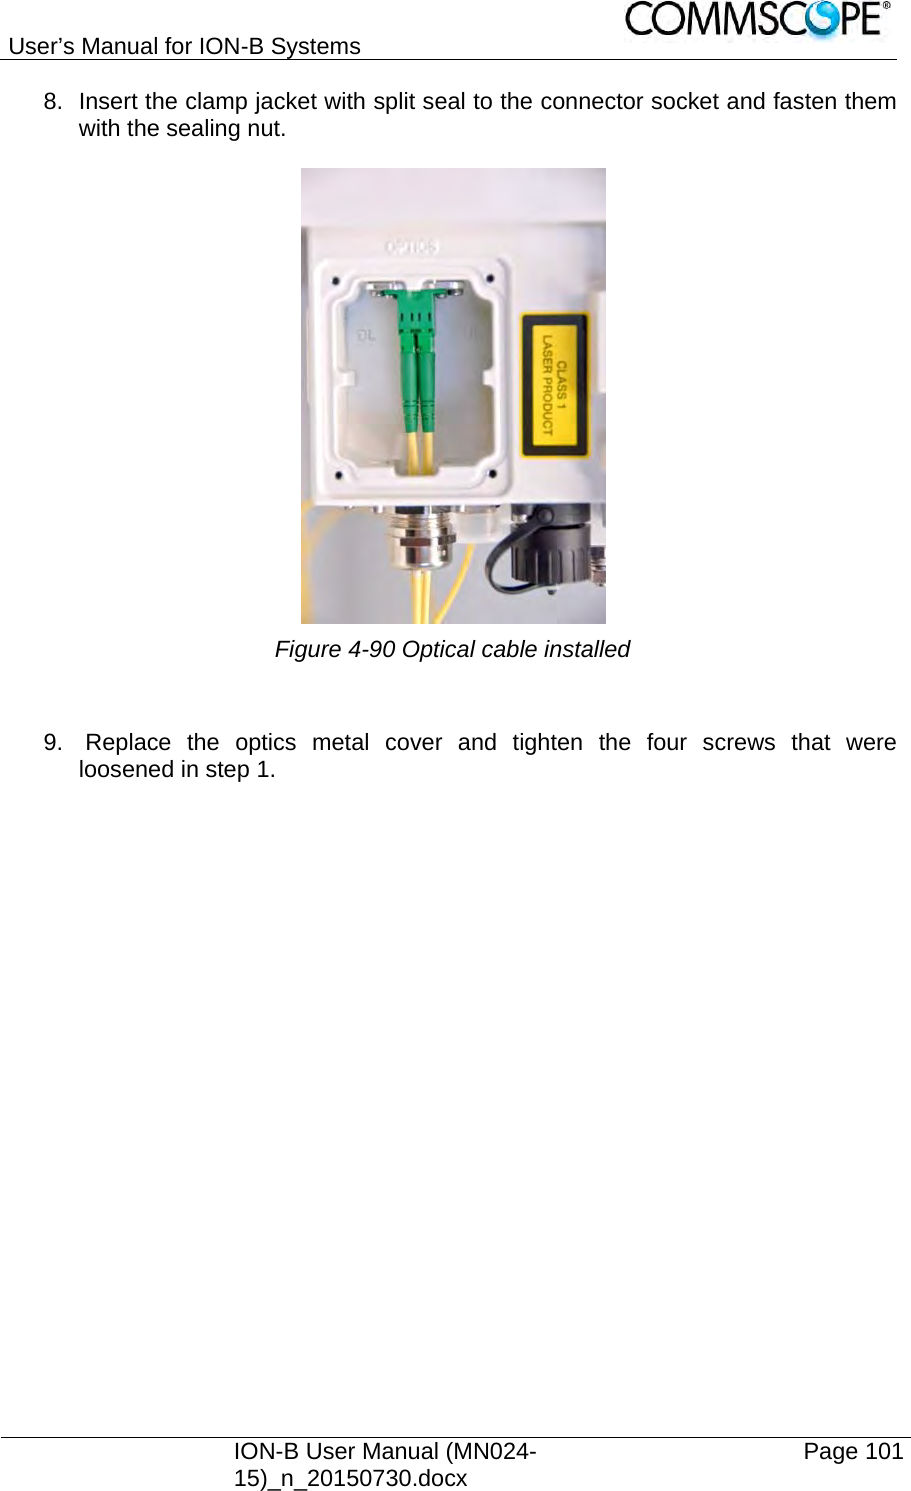 User’s Manual for ION-B Systems    ION-B User Manual (MN024-15)_n_20150730.docx  Page 101 8.  Insert the clamp jacket with split seal to the connector socket and fasten them with the sealing nut.   Figure 4-90 Optical cable installed   9.  Replace the optics metal cover and tighten the four screws that were loosened in step 1. 